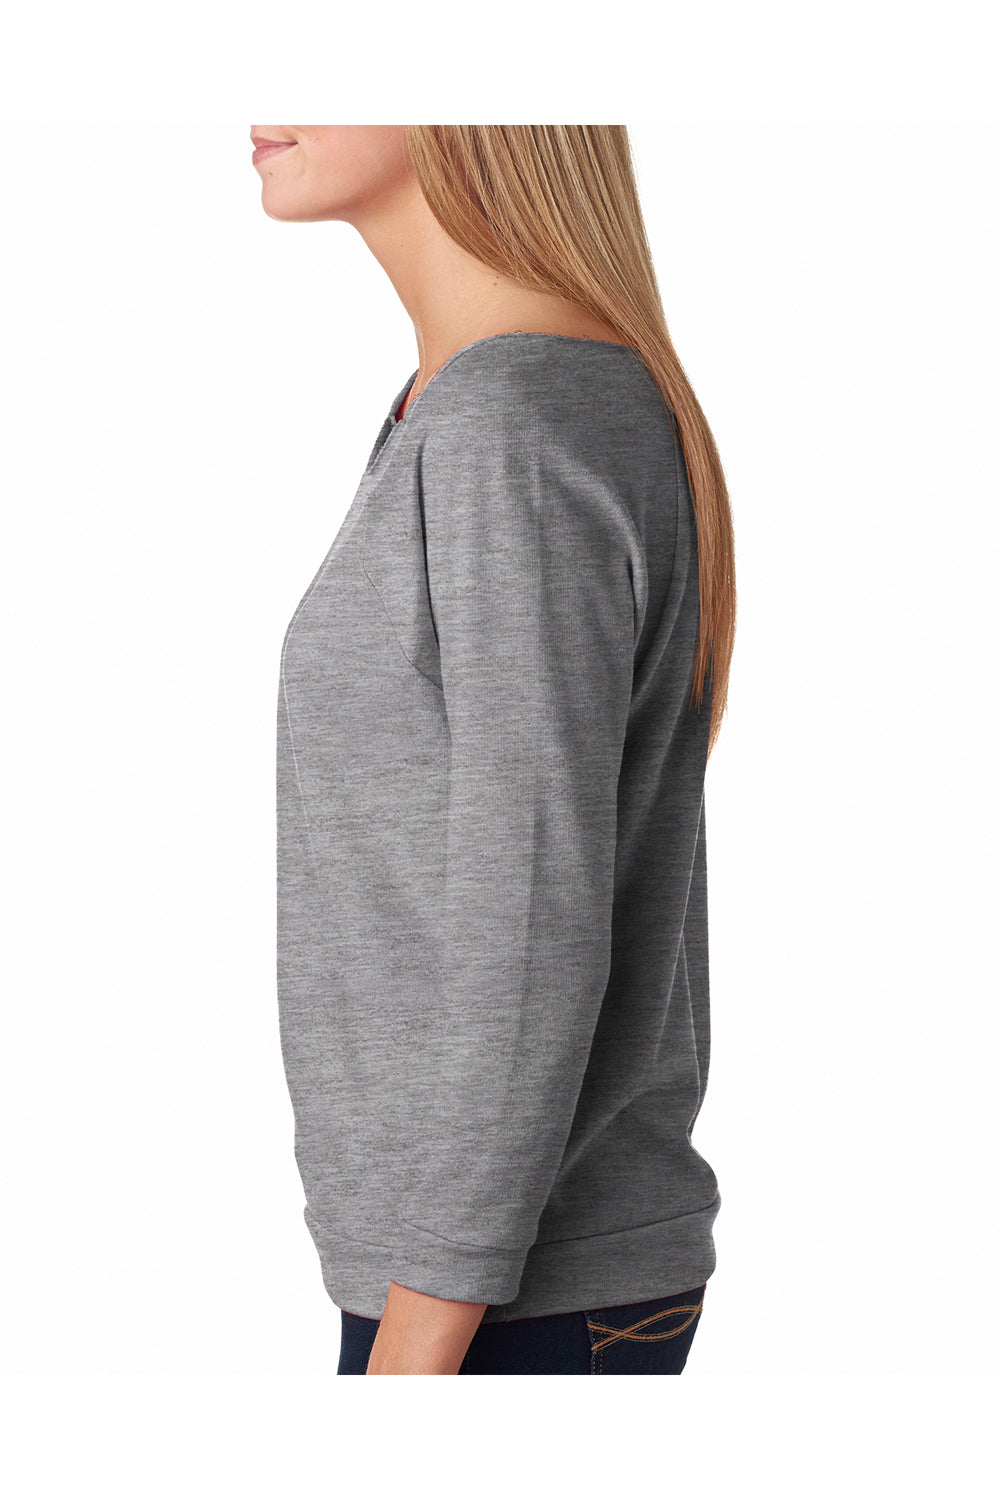 Next Level 6951 Womens French Terry 3/4 Sleeve Wide Neck T-Shirt Heather Grey Side